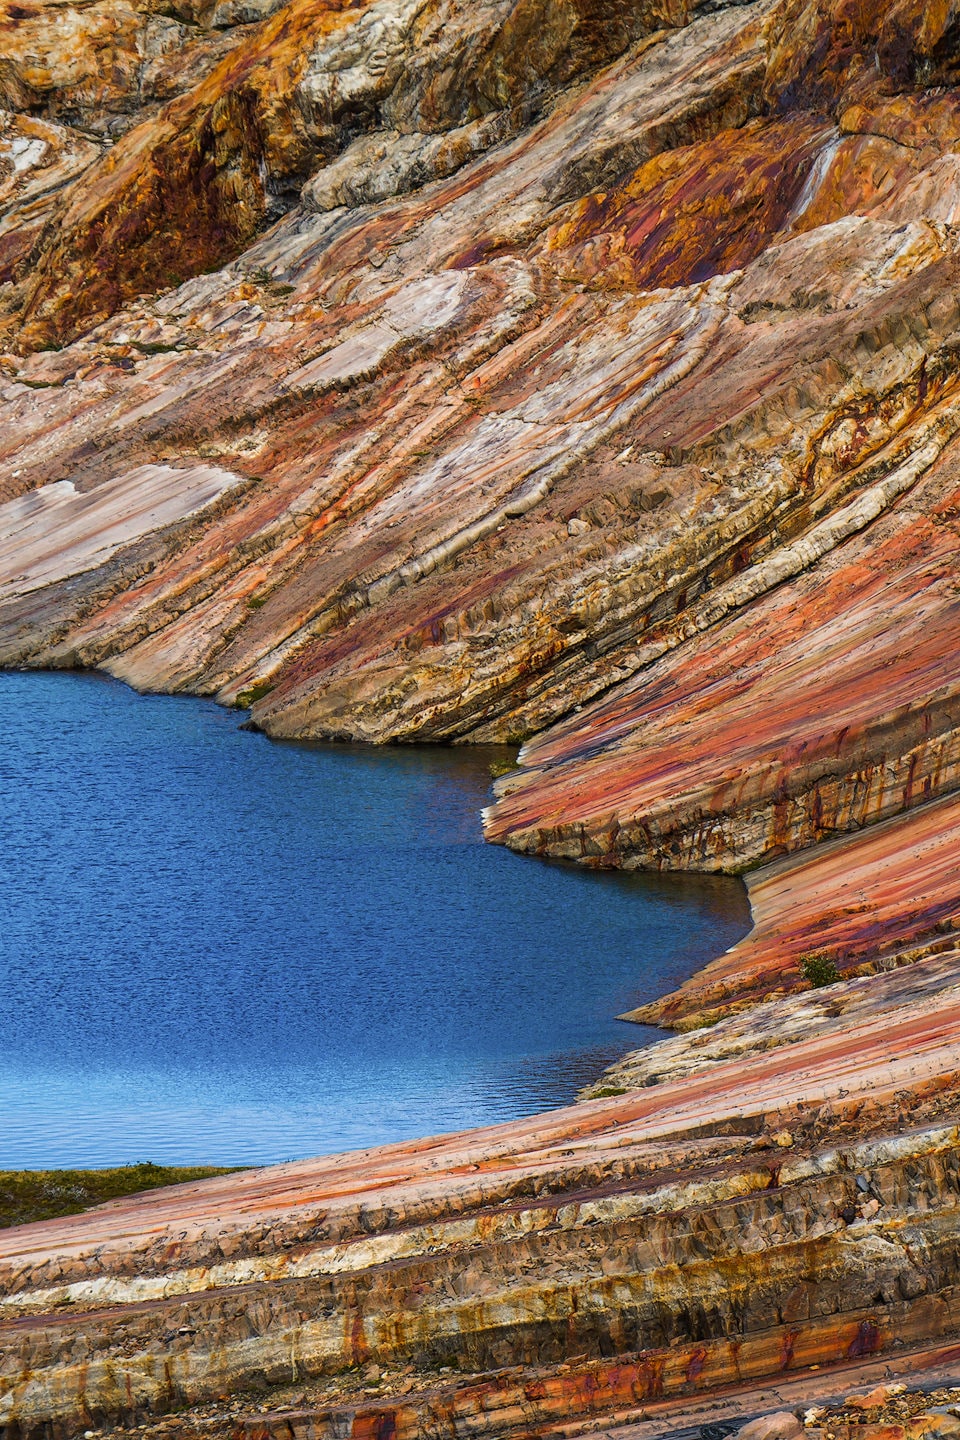 Colourful layers of rock and a lake